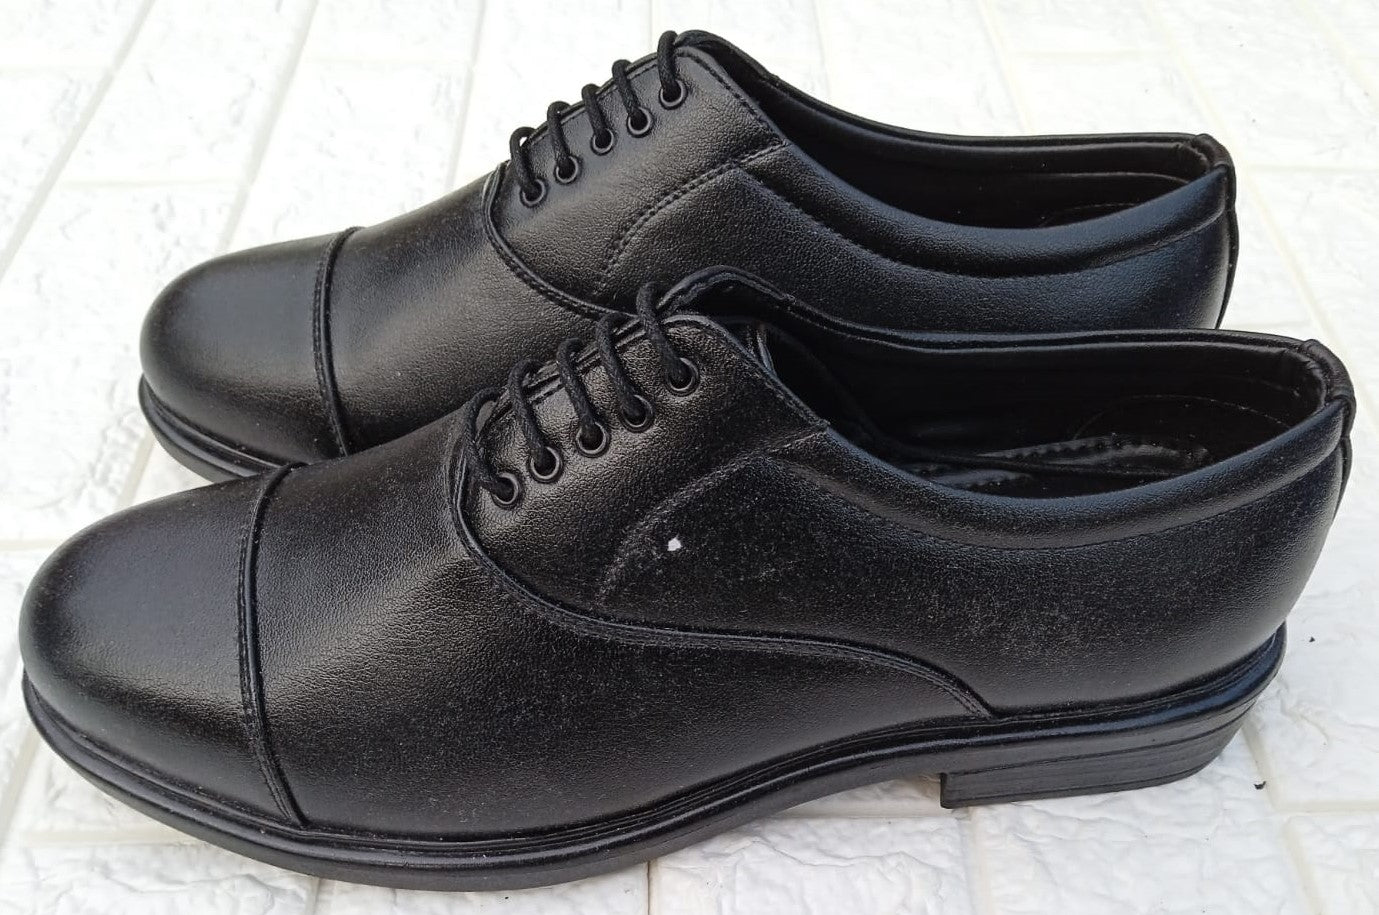 ACTION FORMAL Shoes - Defective